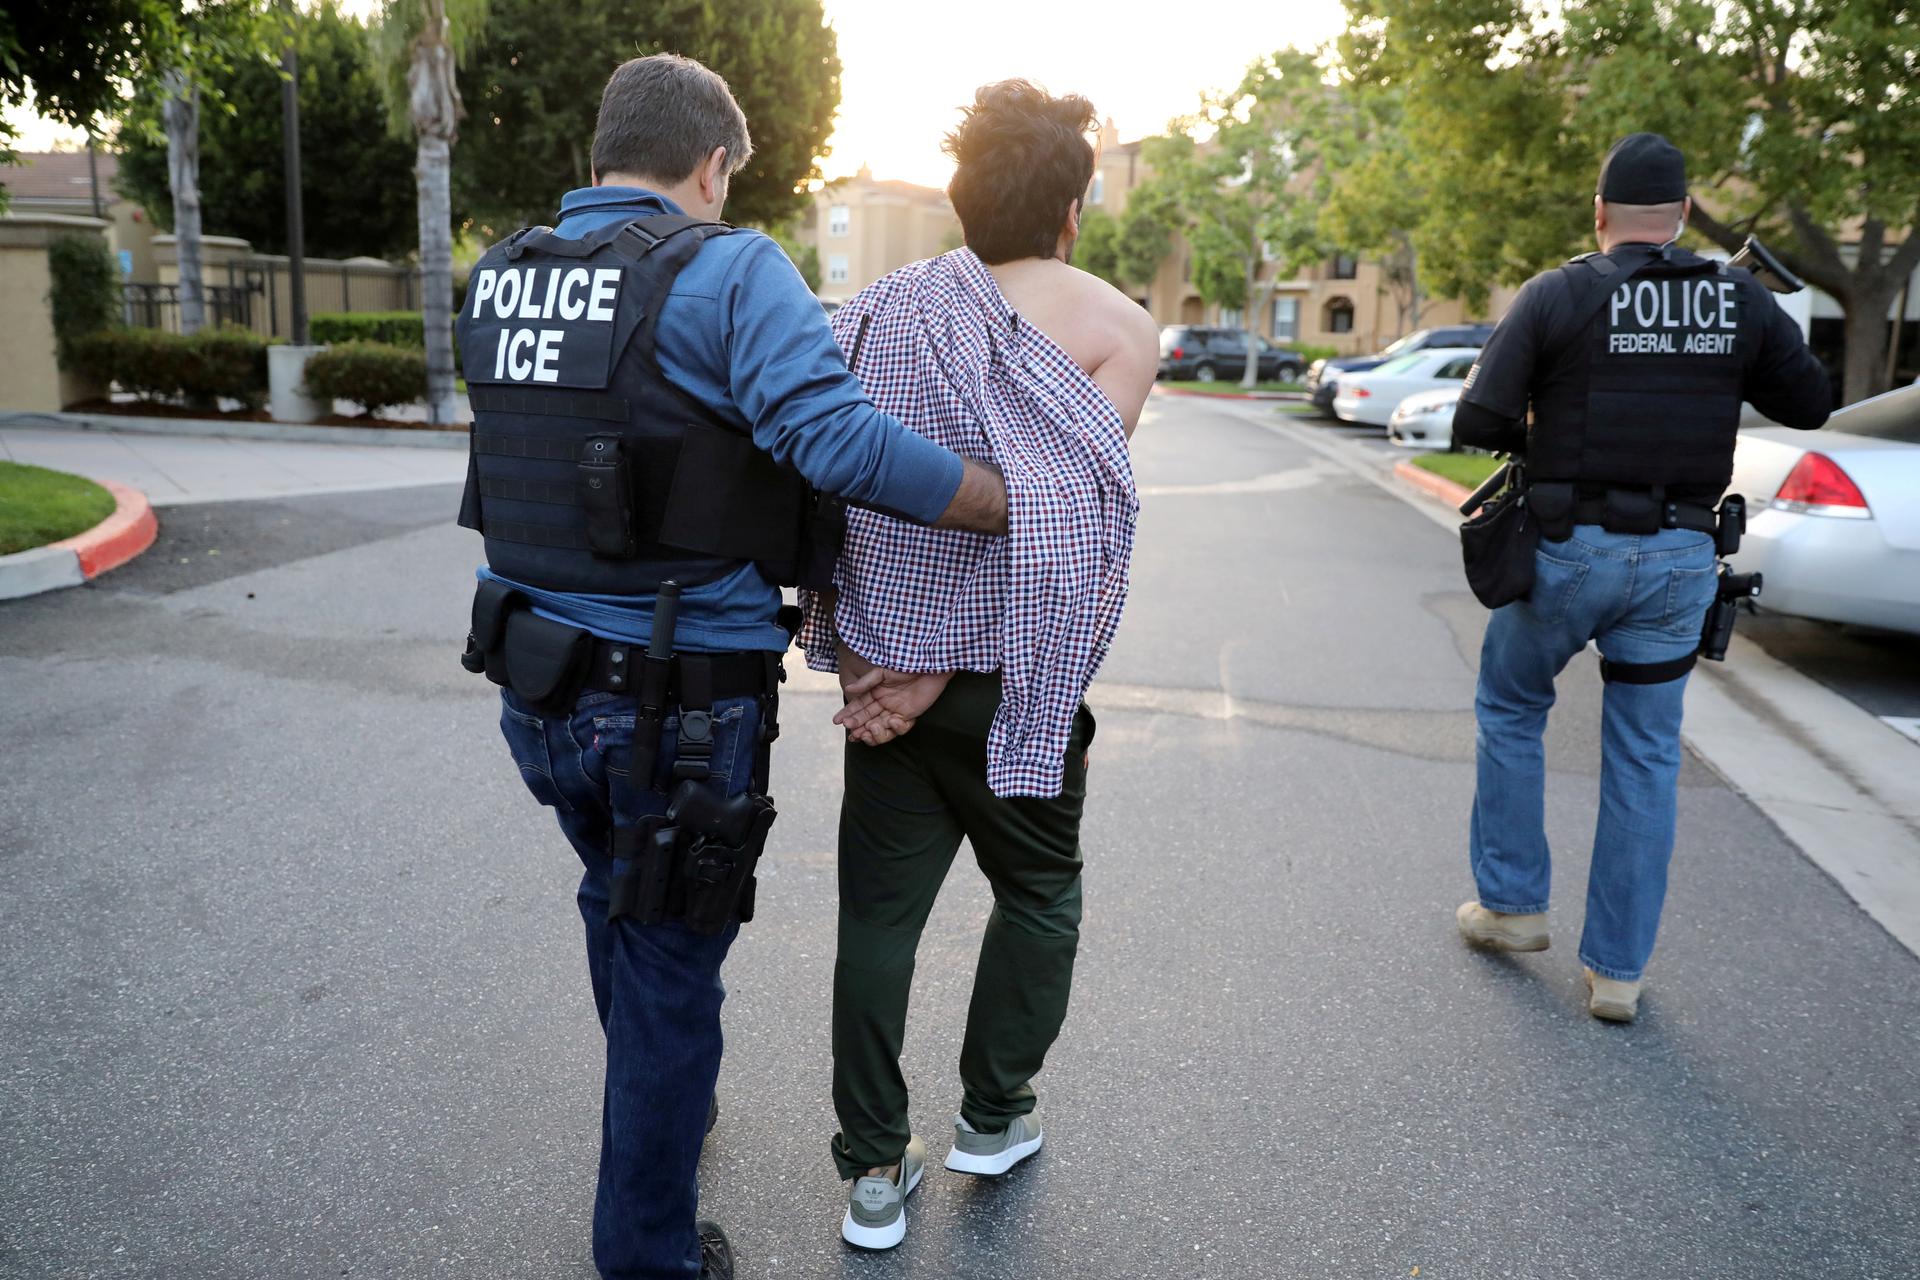 A man with "POLICE ICE" protective vest leads a man in handcuffs down street, with another officer with "POLICE FEDERAL AGENT" on vest on the right